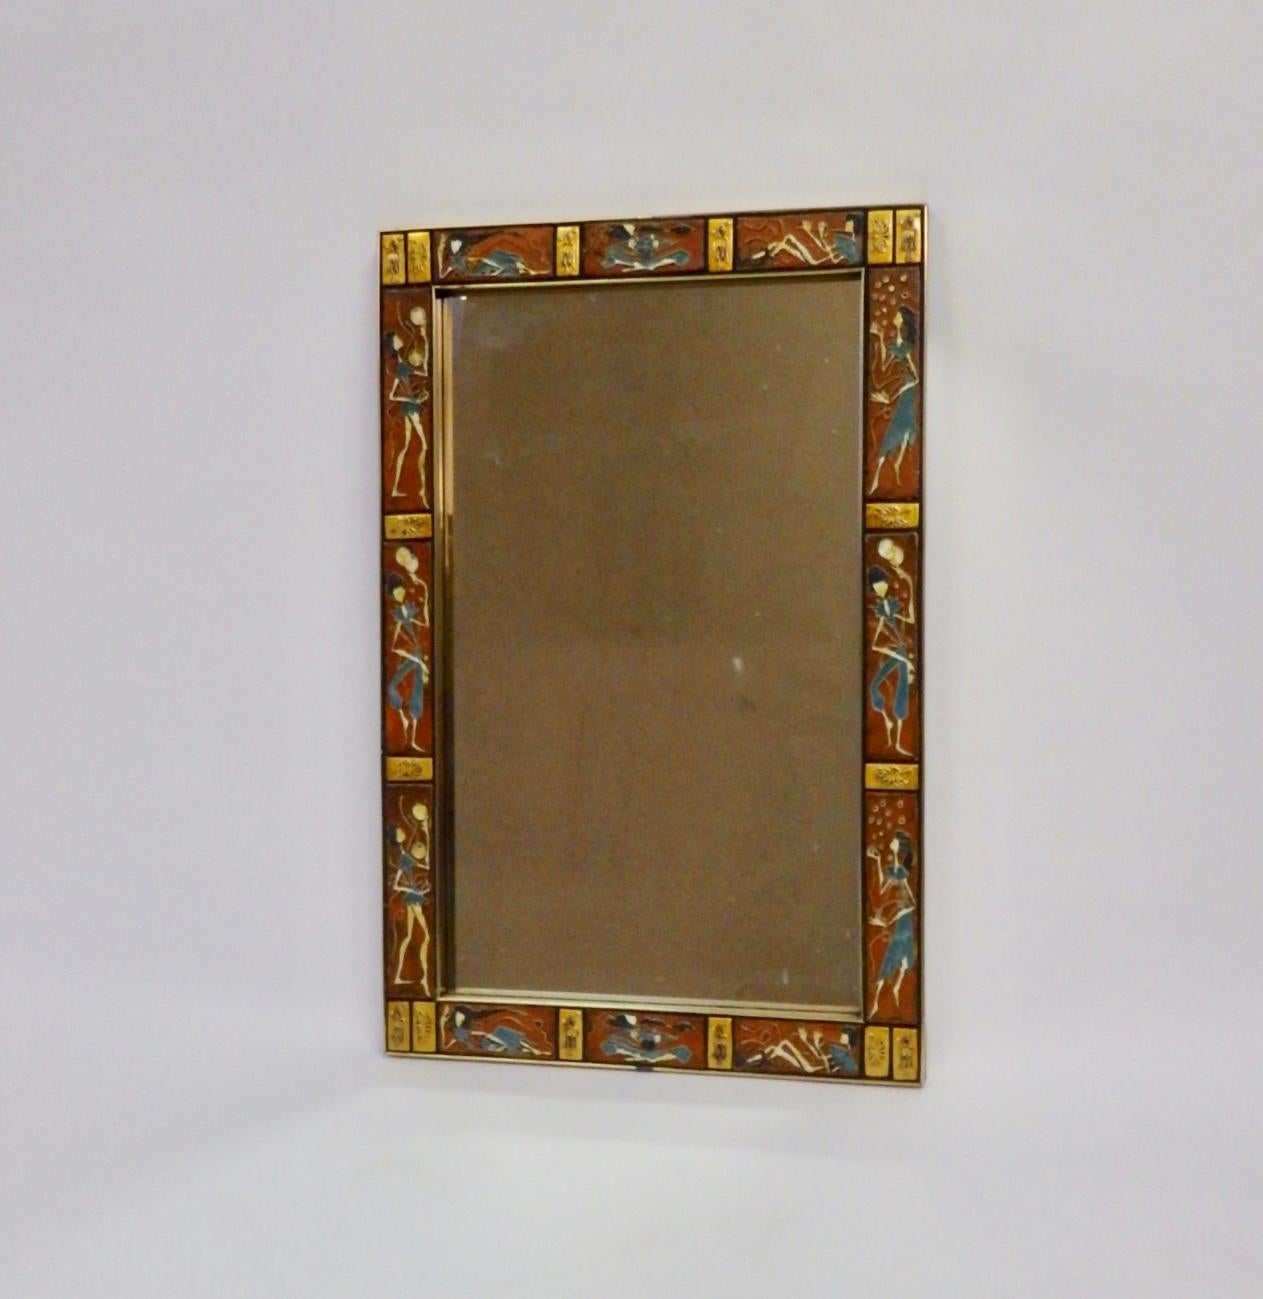 Interesting Labarge mirror. Framed with ceramic tile depicting a woman playing.